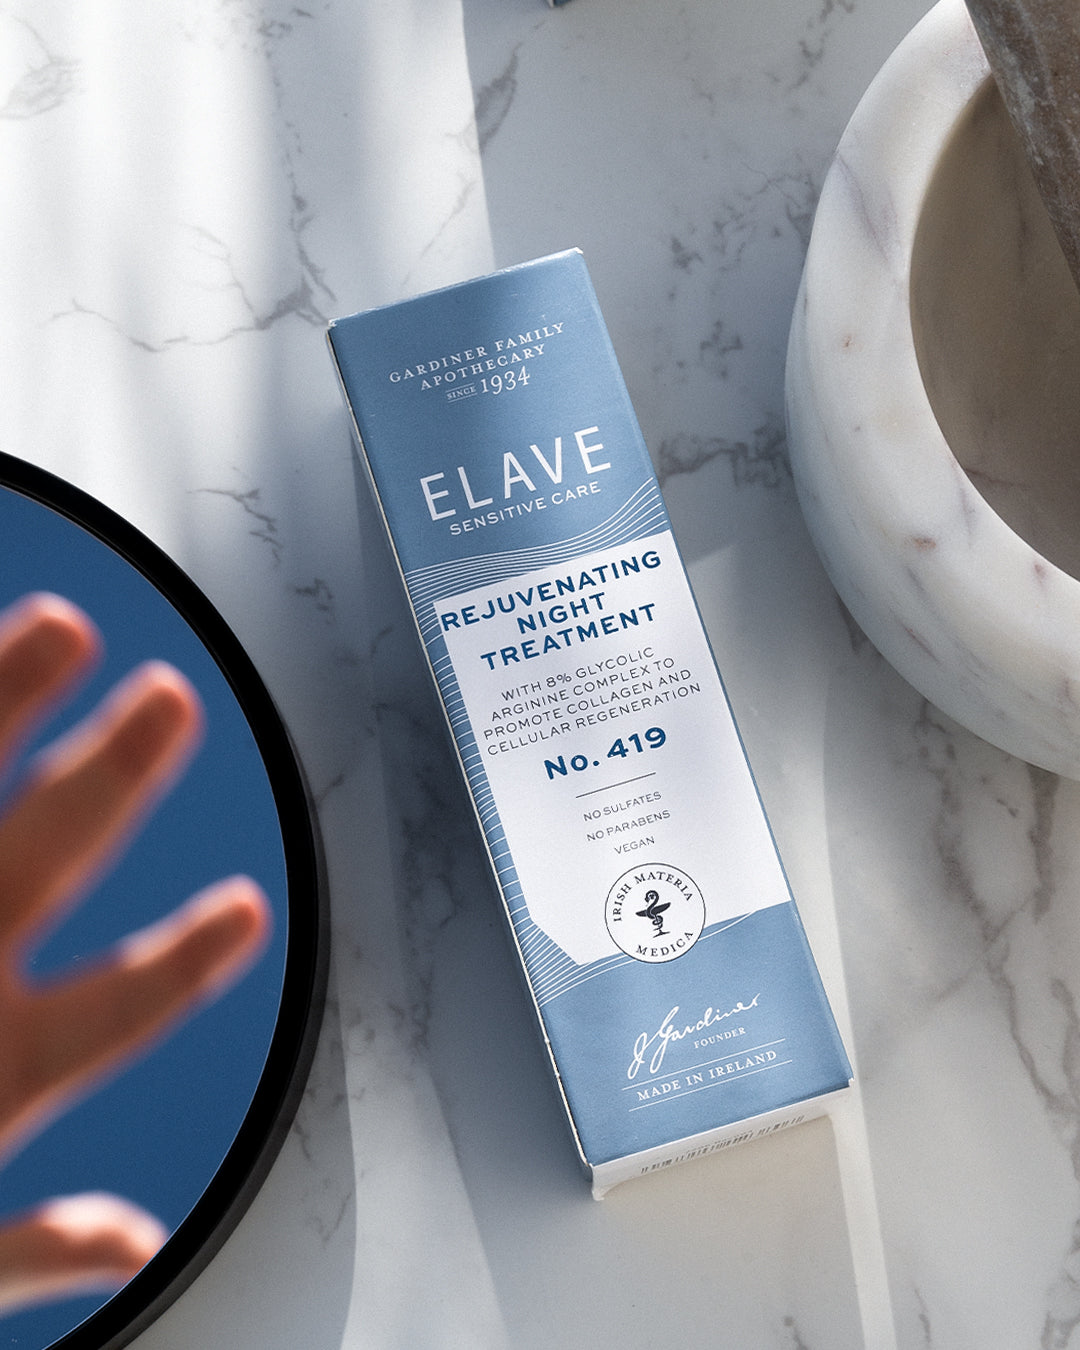 Elave Rejuvenating Night Treatment No.419 contains a unique combination of hydrating emollients to repair the skin, together with Glycolic Acid Arginine complex to rejuvenate skin overnight.